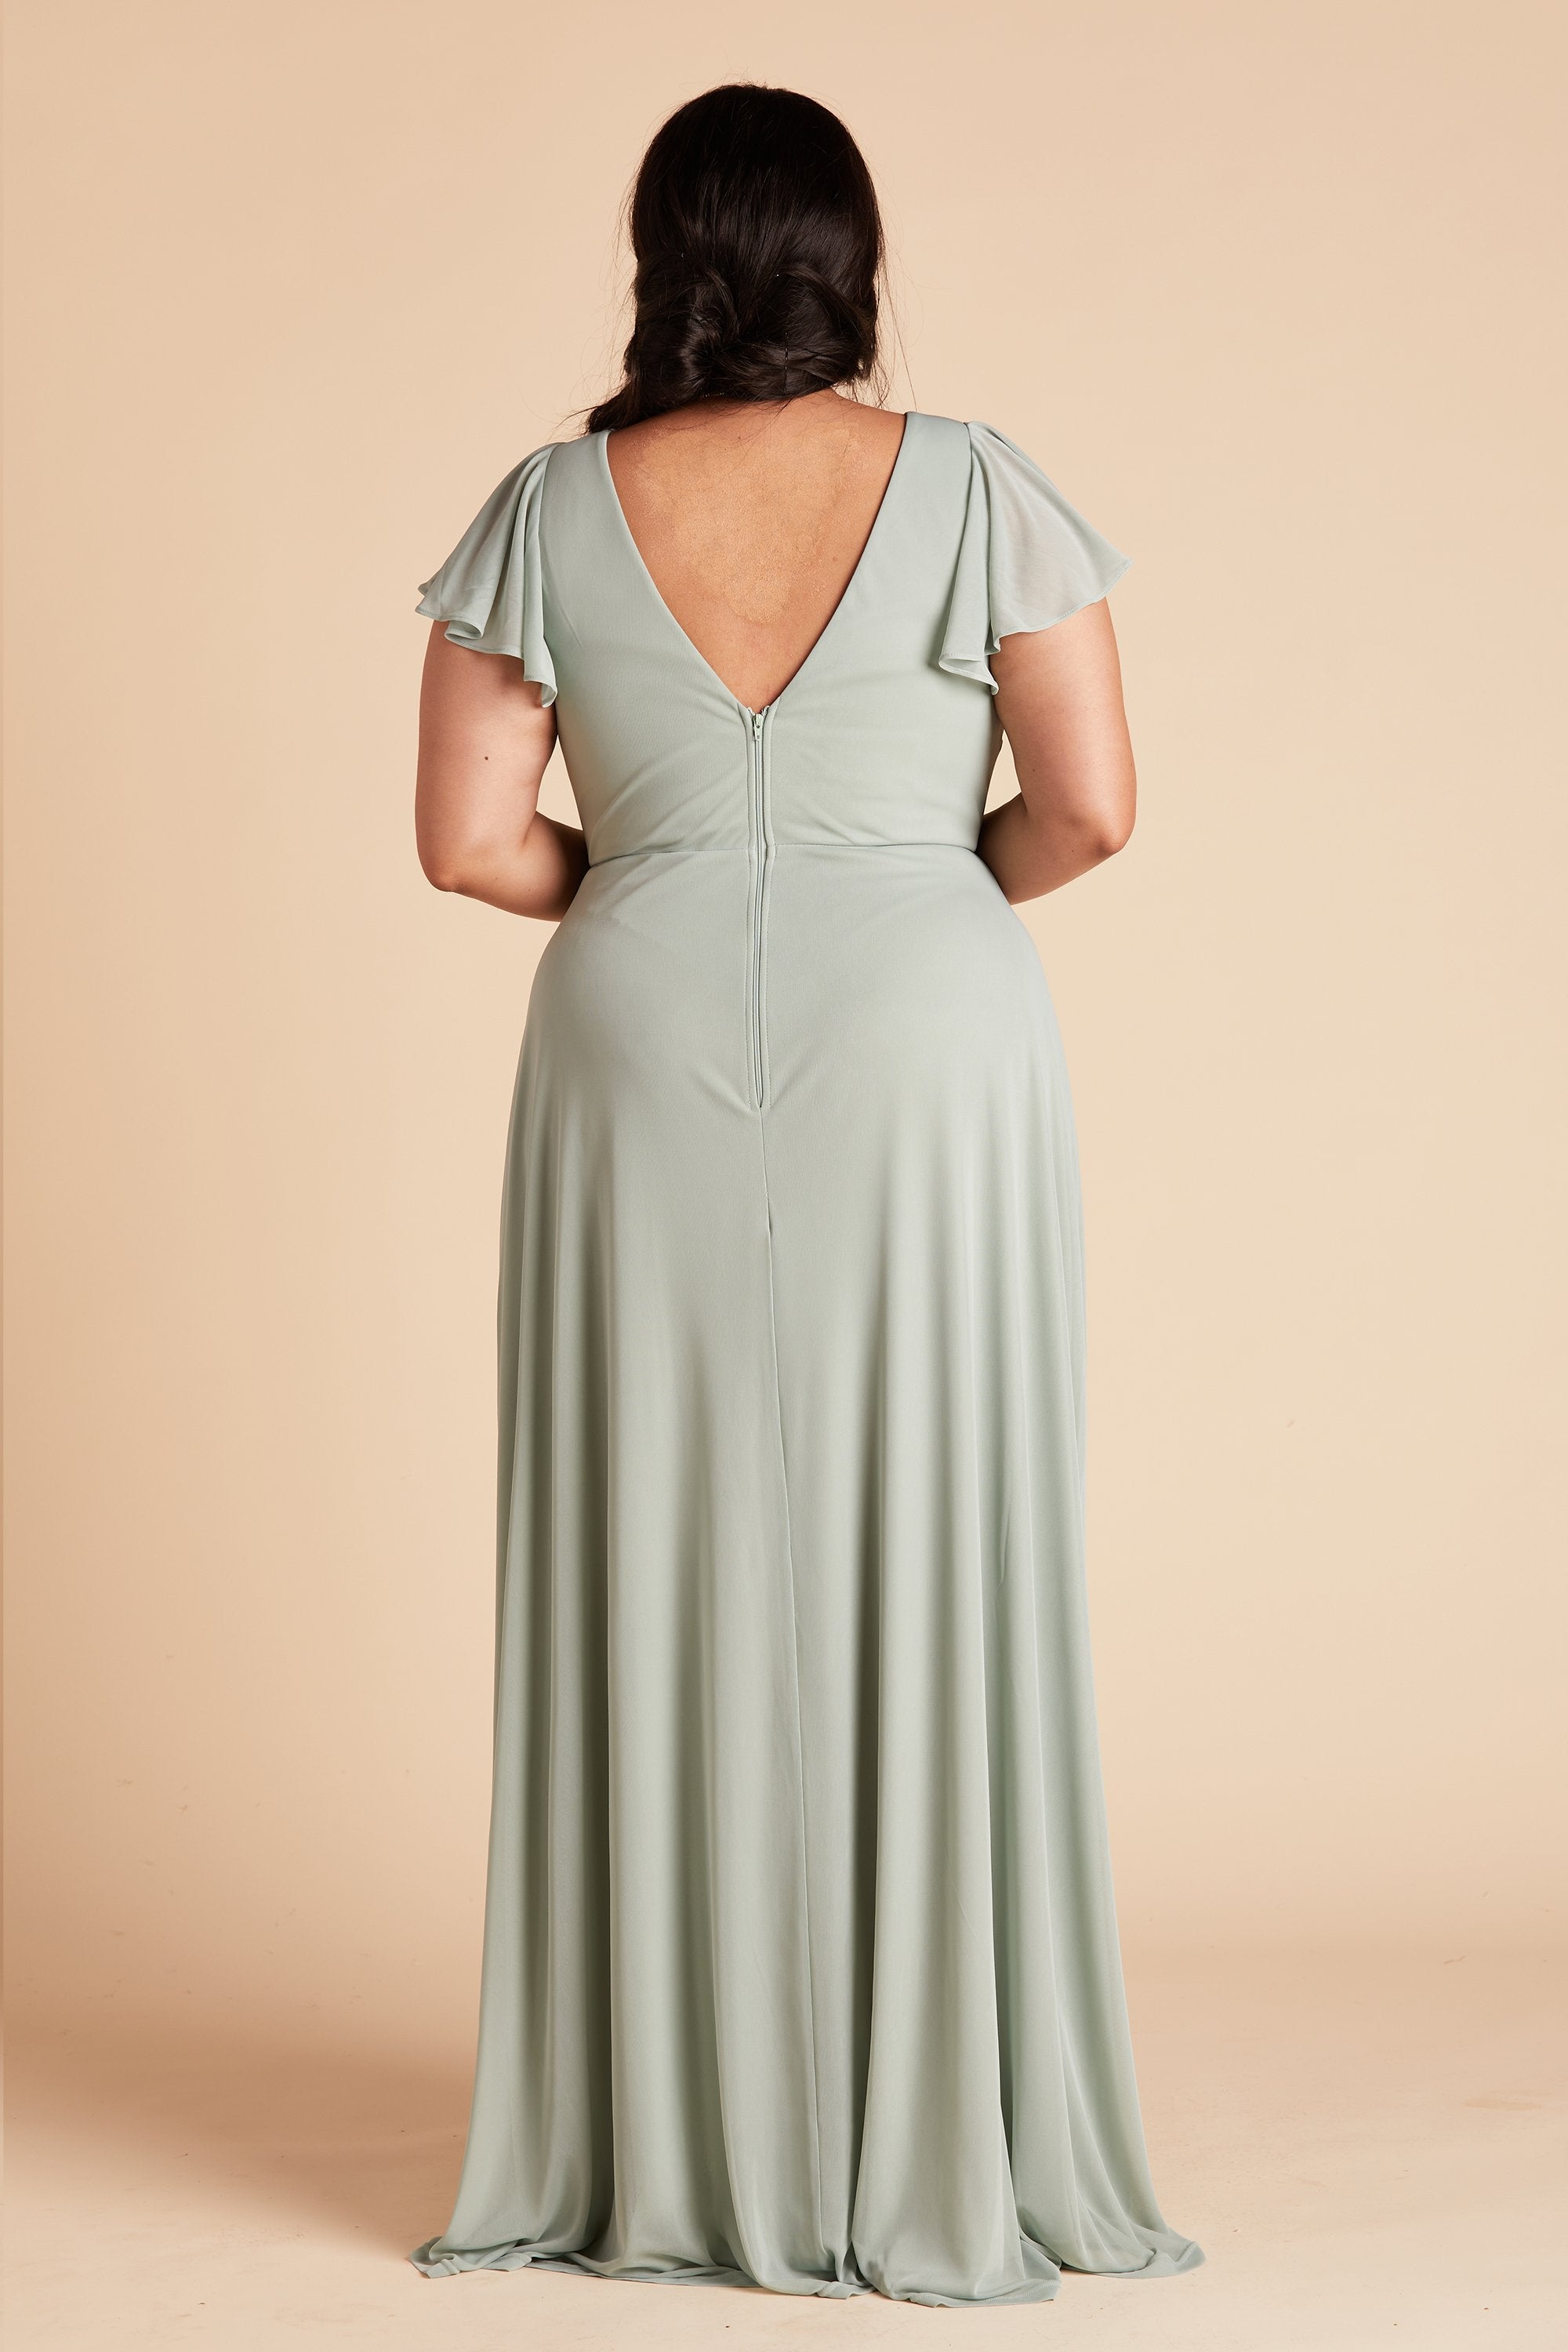 Hannah plus size bridesmaids dress in sage green mesh by Birdy Grey, back view